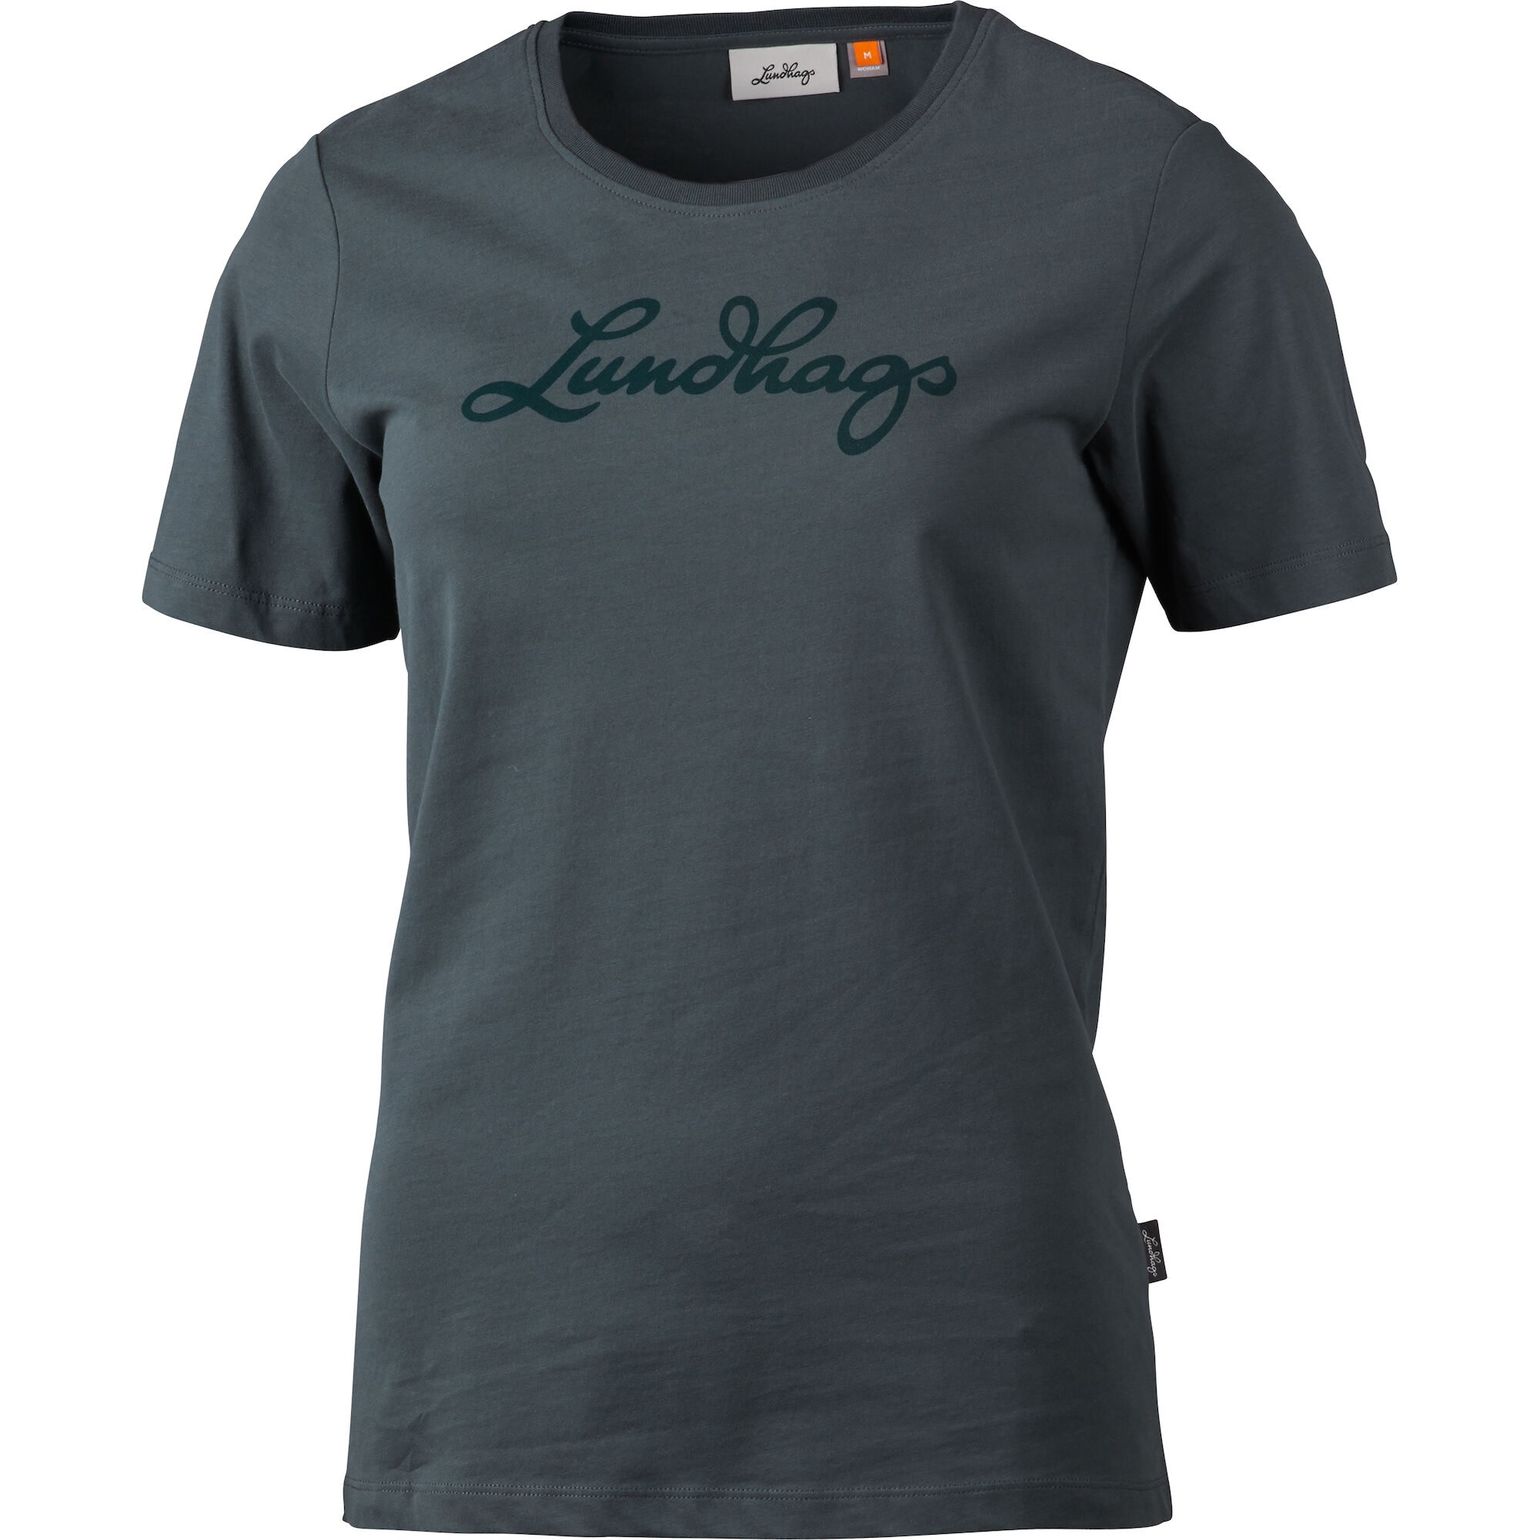 Lundhags Women's Lundhags Tee Dk Agave